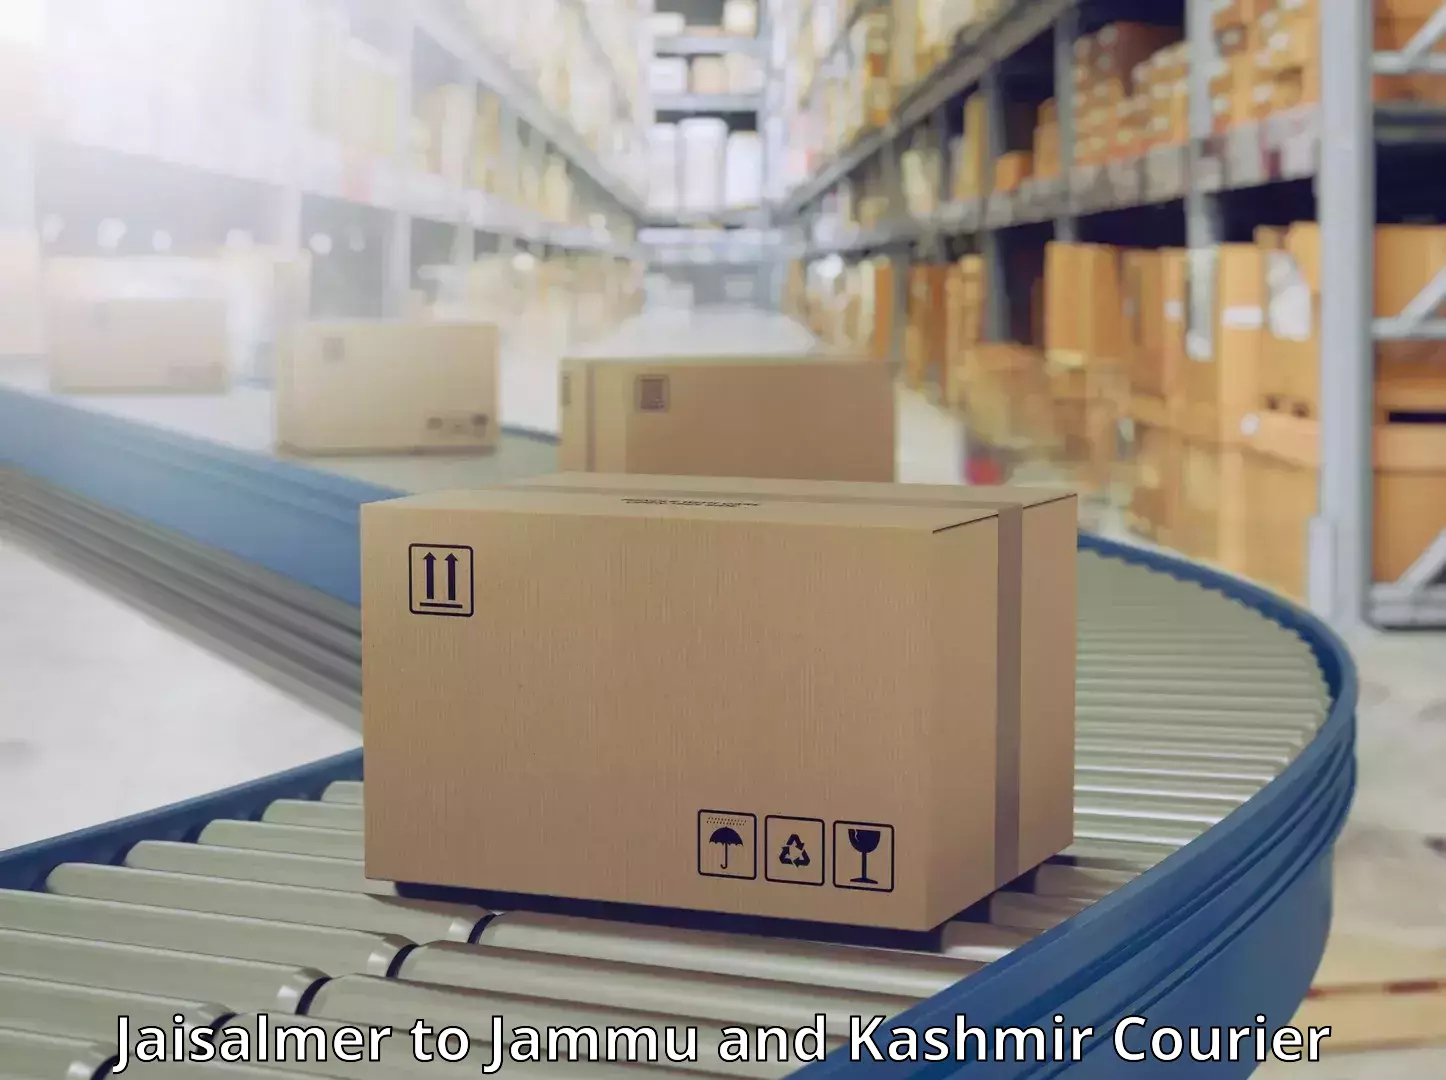 Automated parcel services Jaisalmer to Jammu and Kashmir